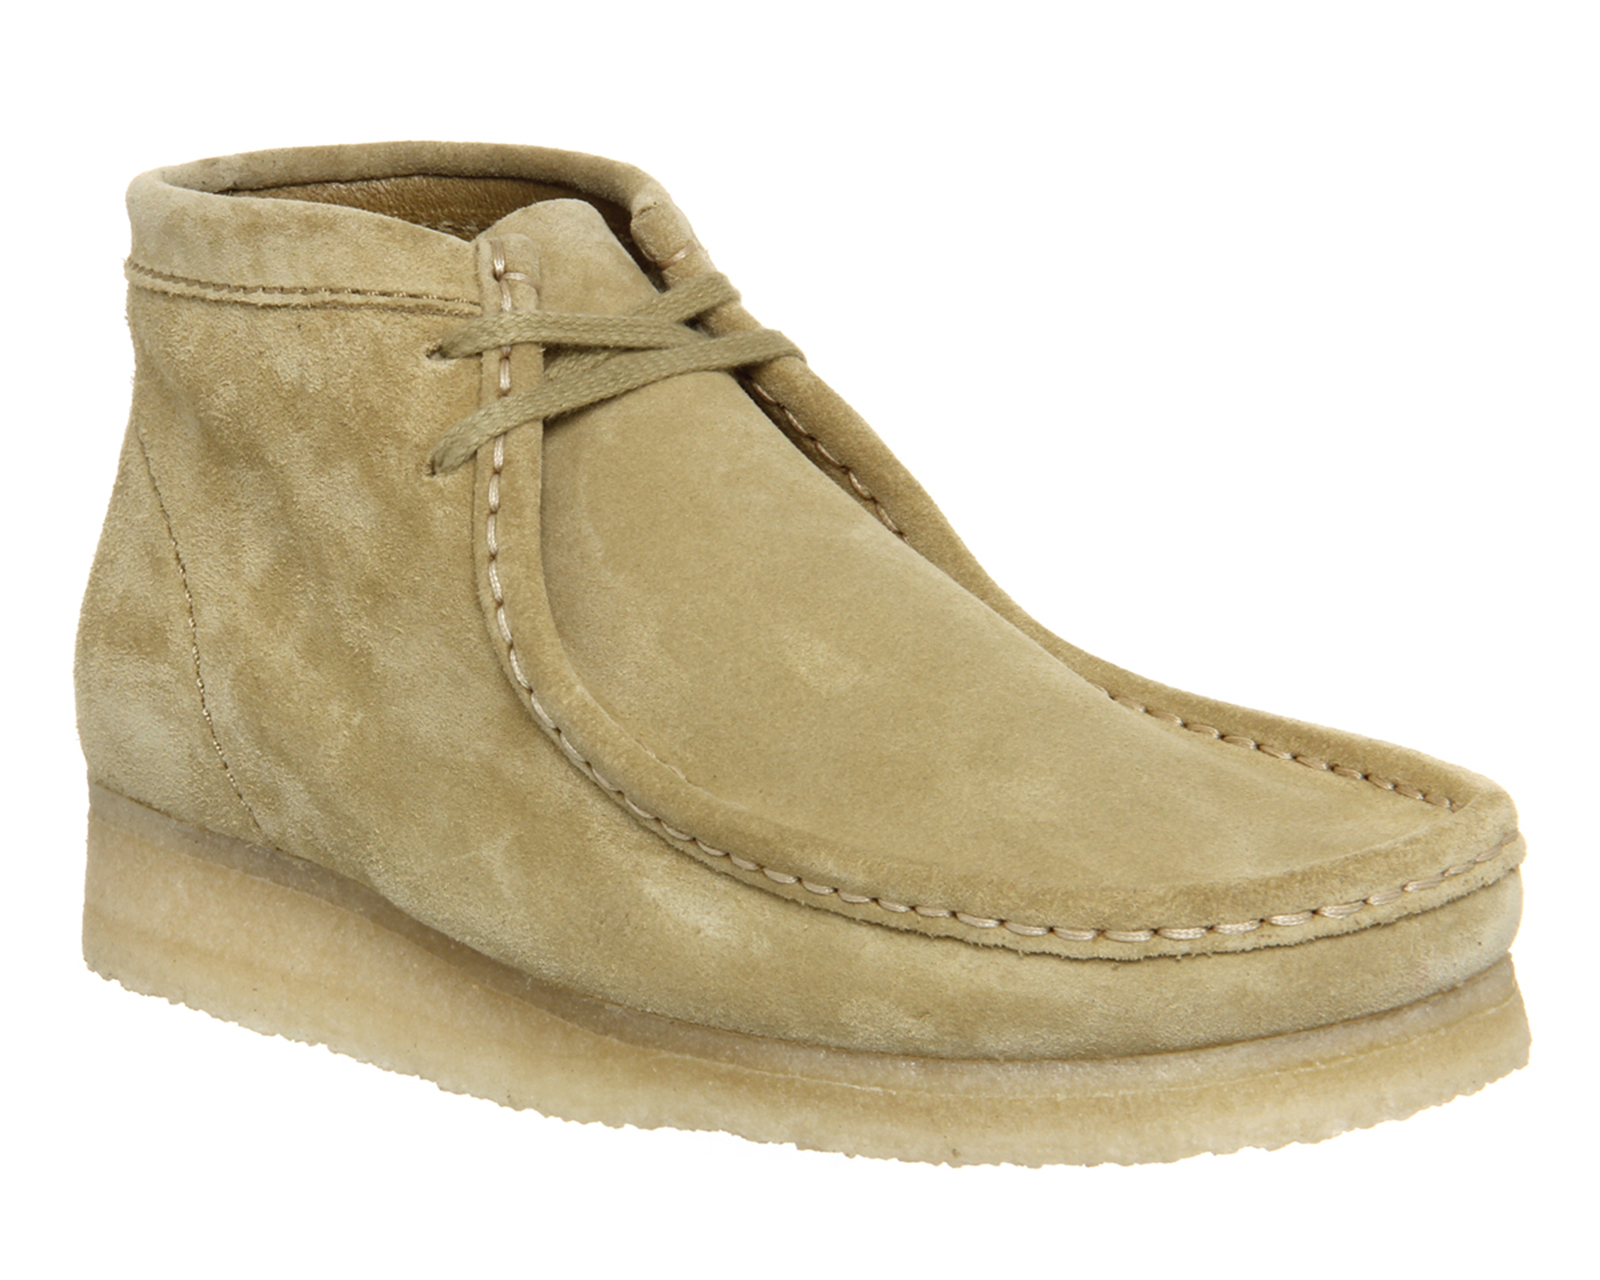 wallabee boots sale